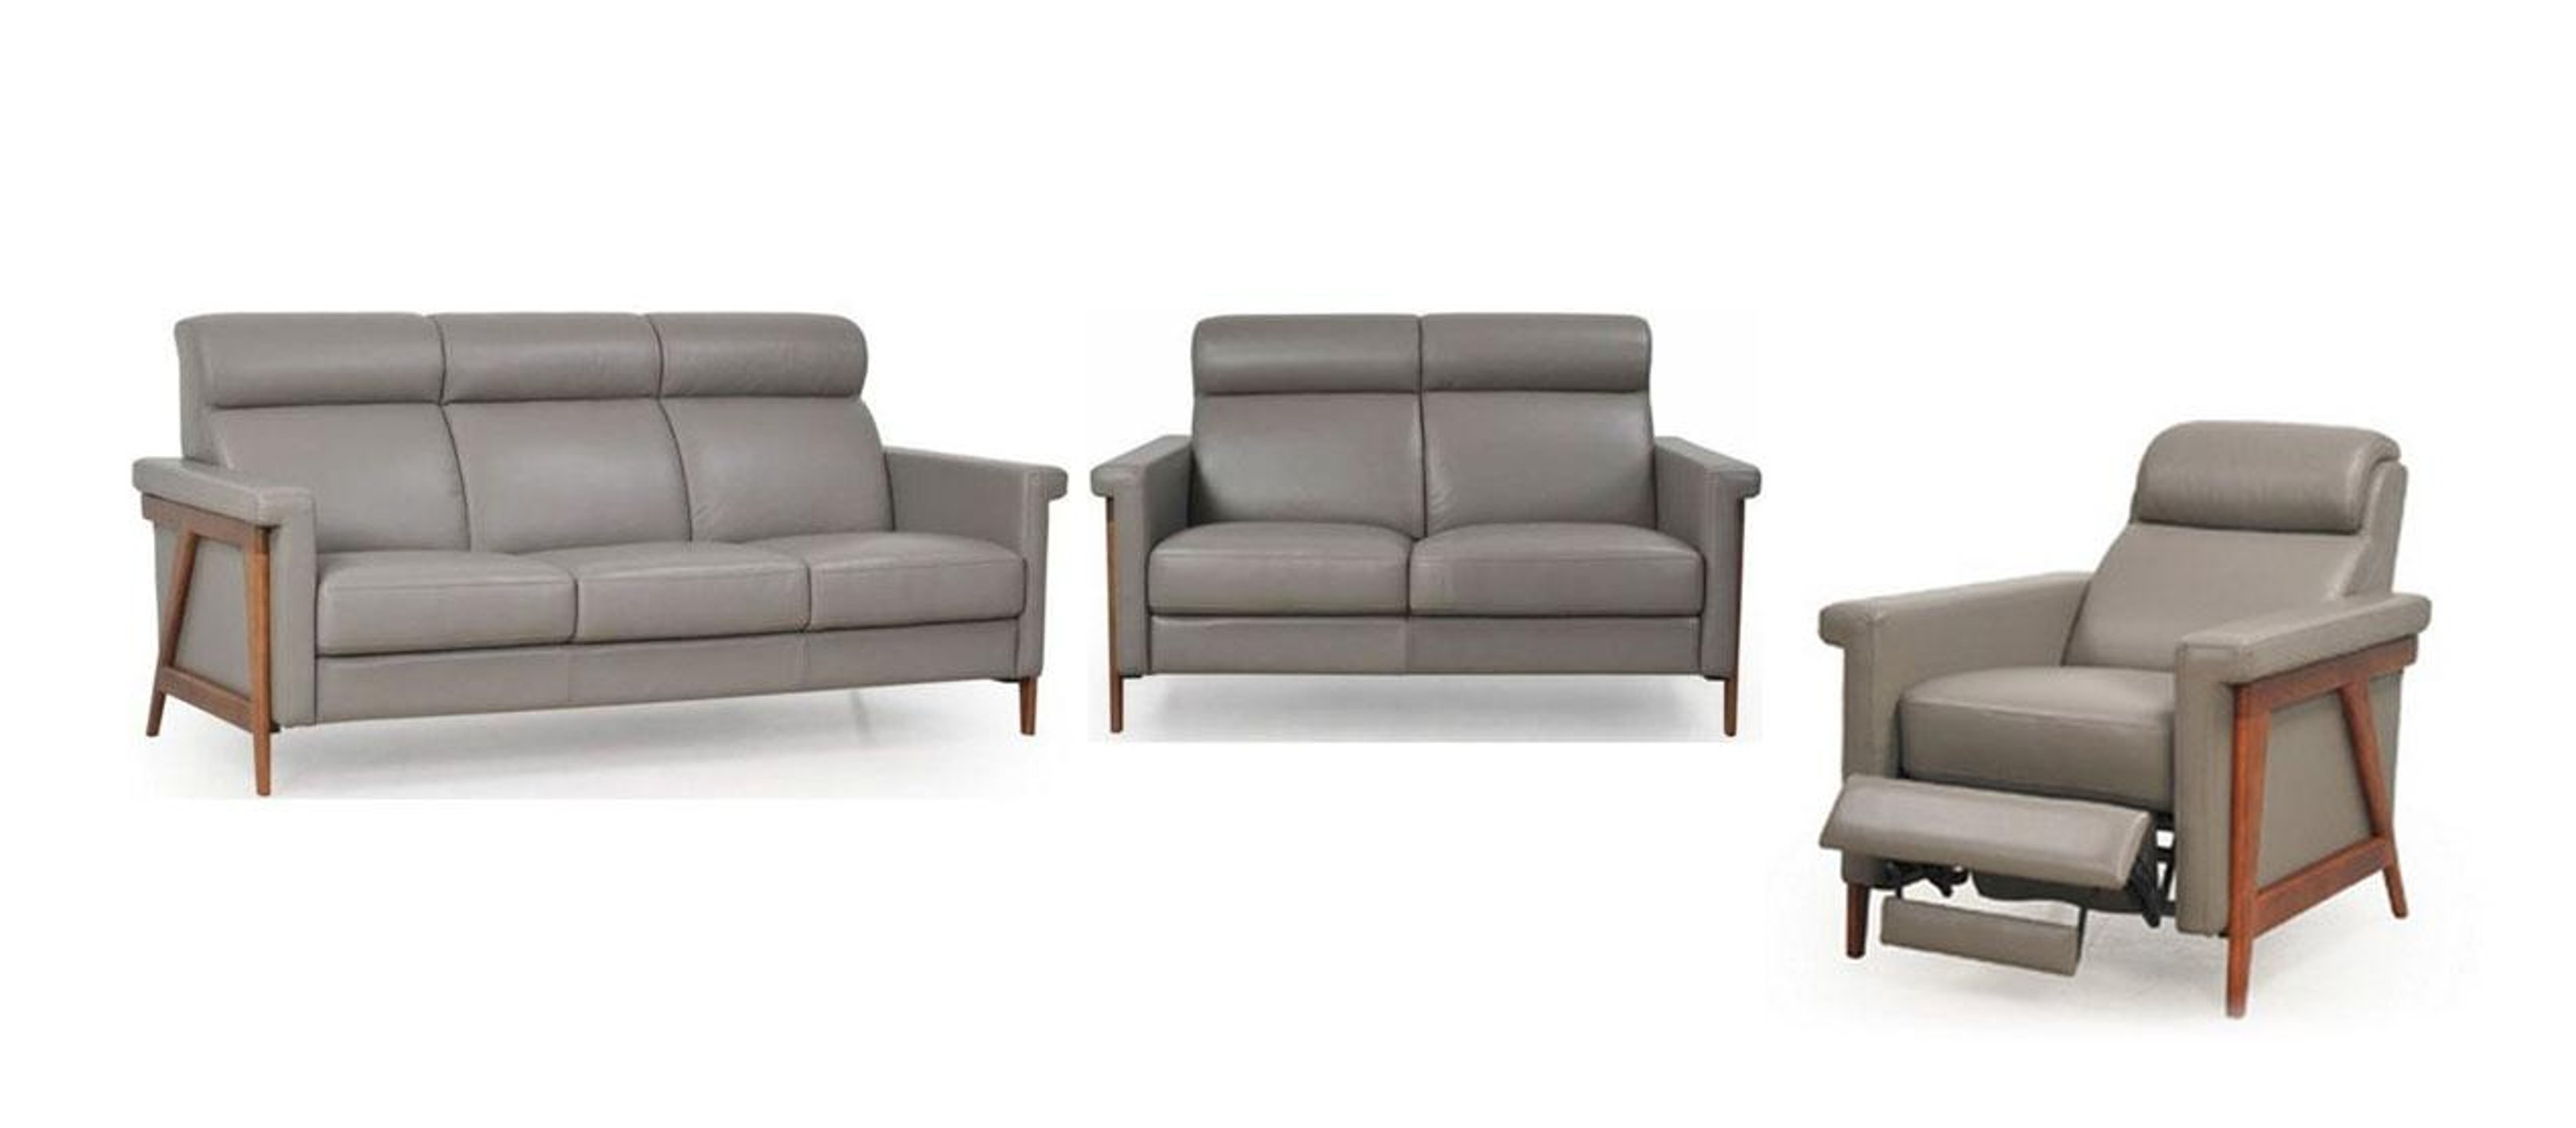 Discover Living Room Furniture Deals - Moroni Harvard 579 Sofa Loveseat and Chair 3 Pcs in Gray, Top grain leather